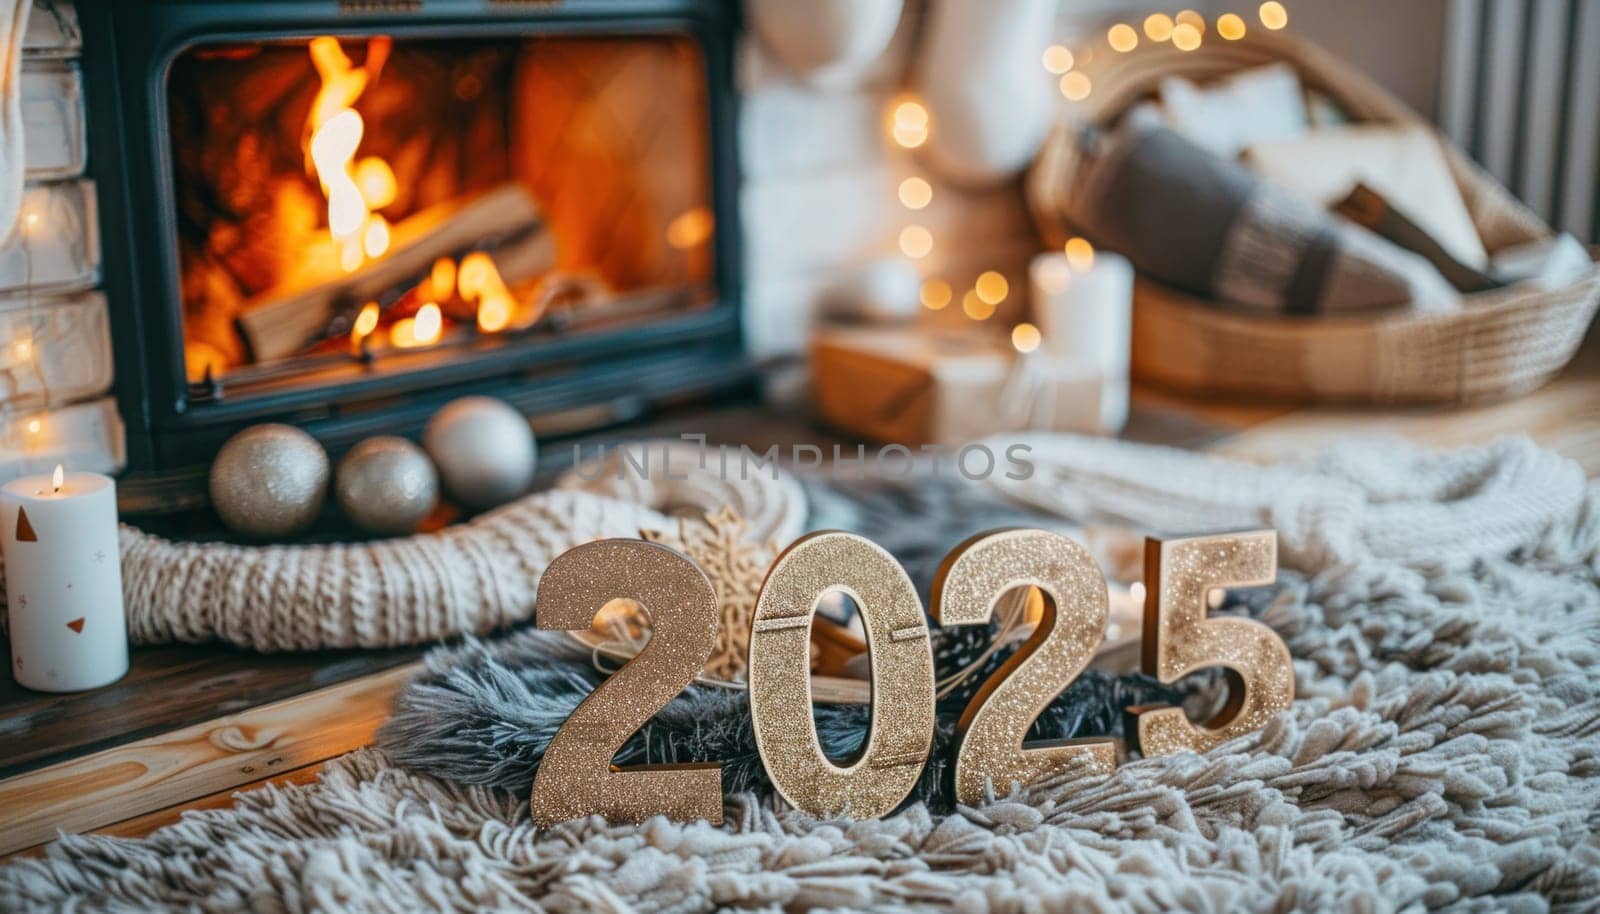 The numbers 2025 displayed near a fireplace add coziness and warmth to the room, creating a pleasant atmosphere